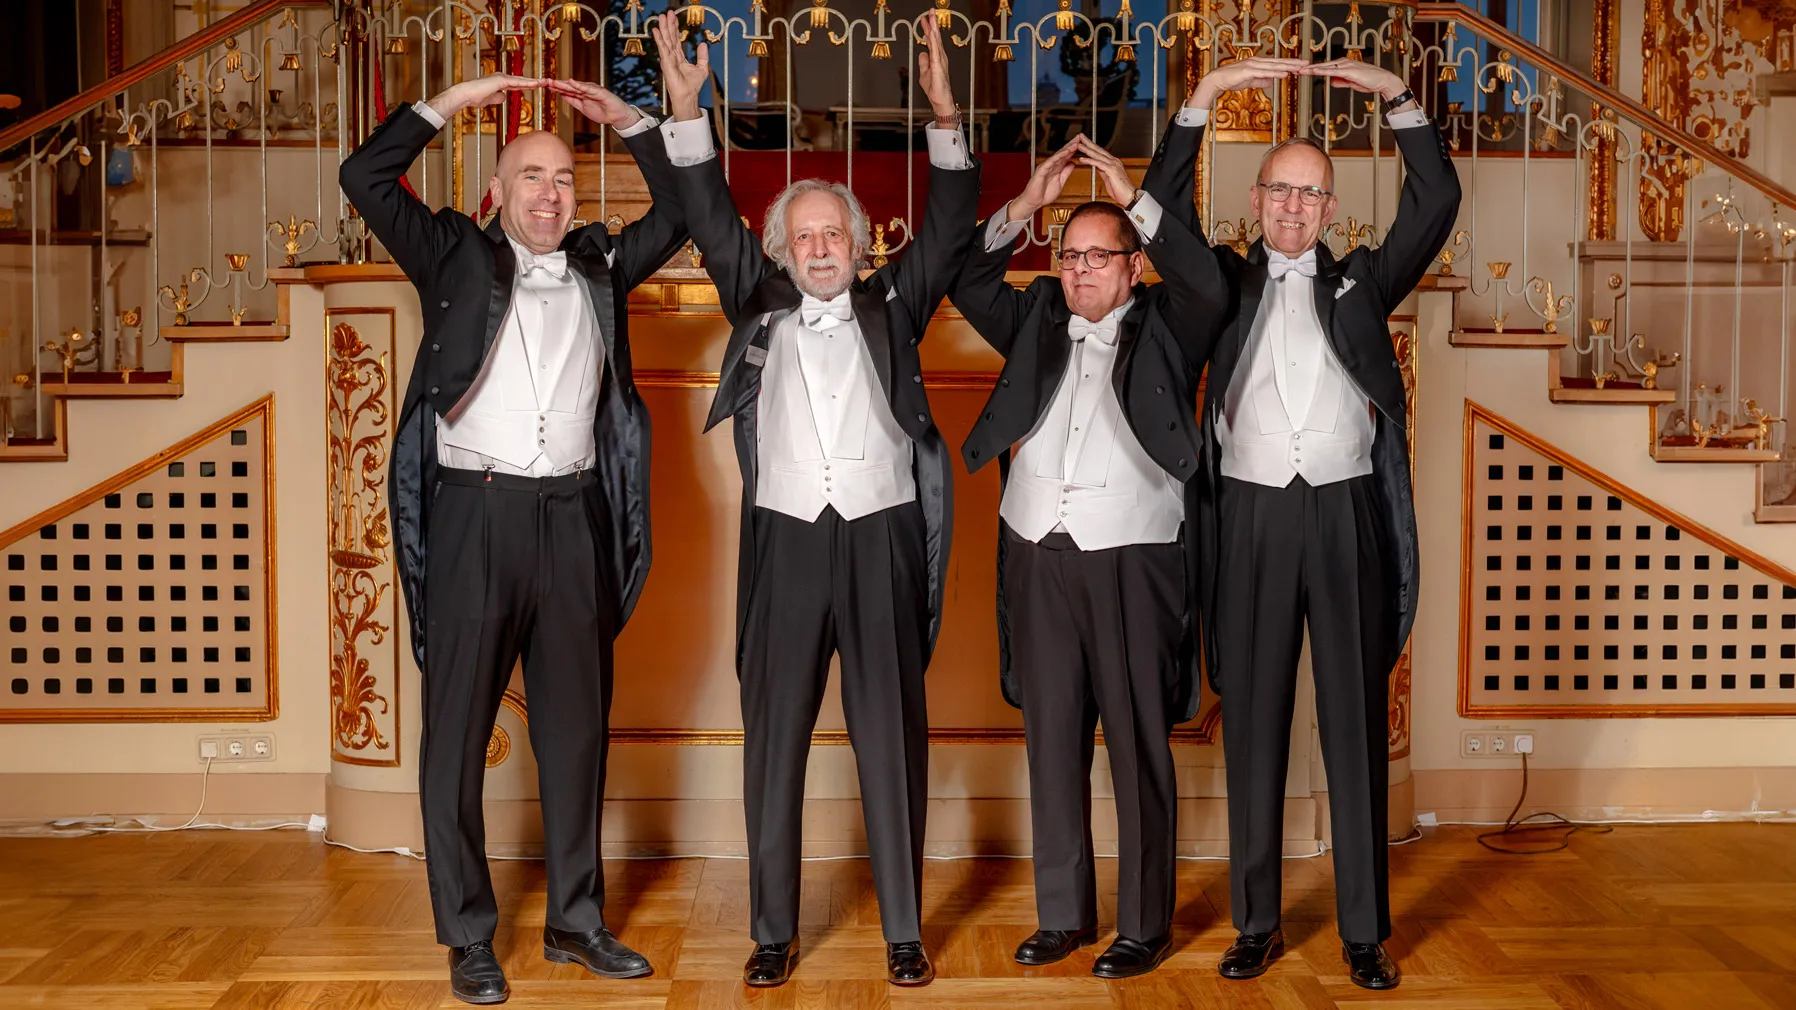 Standing in front of an ornate platform with stairs that extend from both sides, four white men dressed in tuxedos in matching color schemes each form a letter with their arms above their heads, spelling out OHIO. The second man, Nobel winner Pierre Agostini, has flowing white hair, a beard and a smile as he reaches high to make the H.